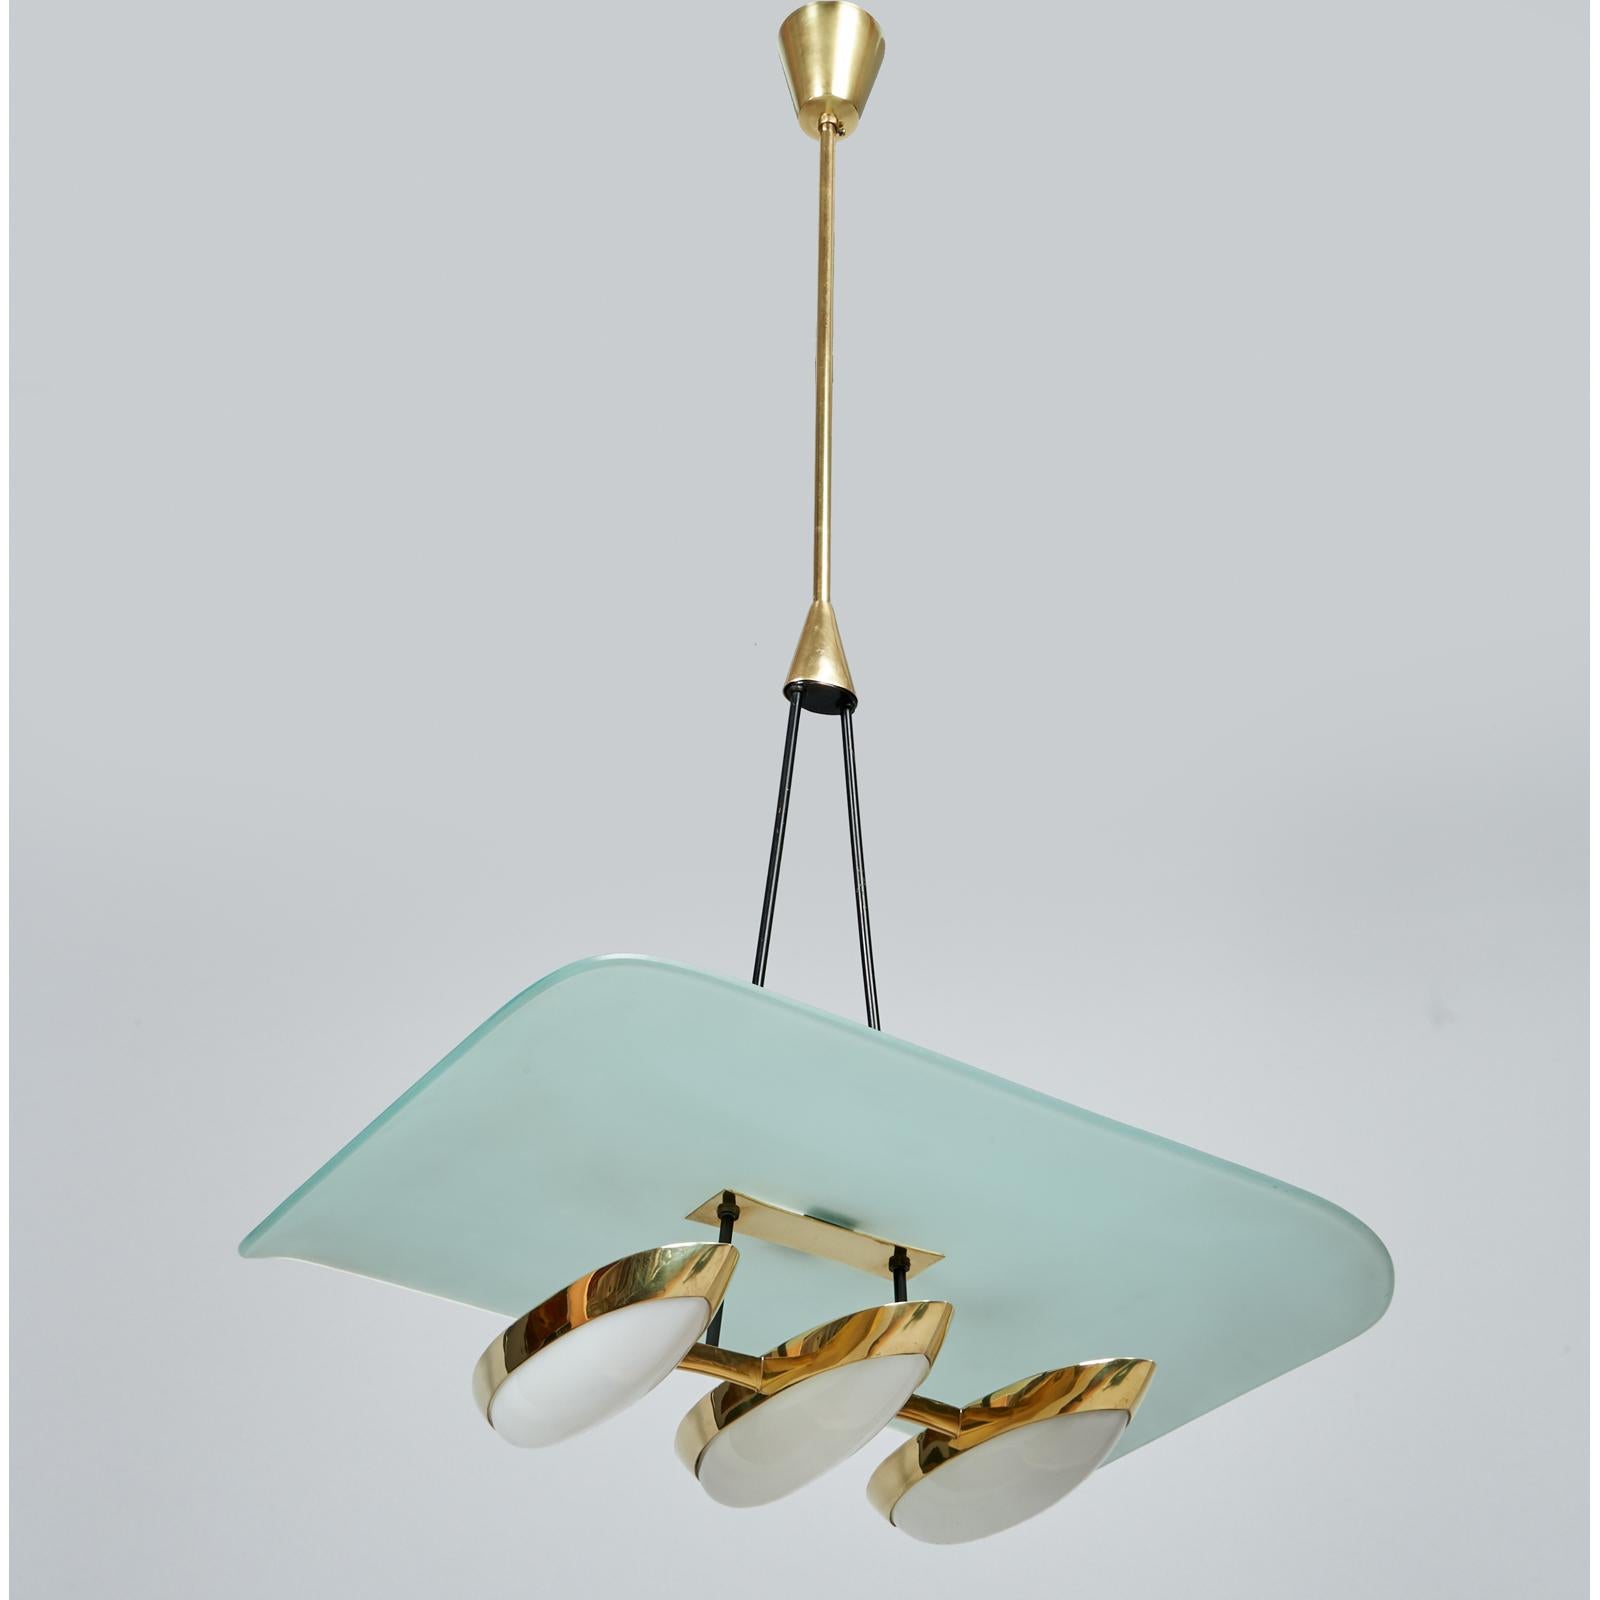 Angelo Lelii (1915–1979) for Arredoluce

A garceful pair of pendant chandeliers by influential Italian designer Angelo Lelii (sometimes spelled Angelo Lelli), Arredoluce's founder. With a floating frosted glass shade soaring like a buoyant sail atop